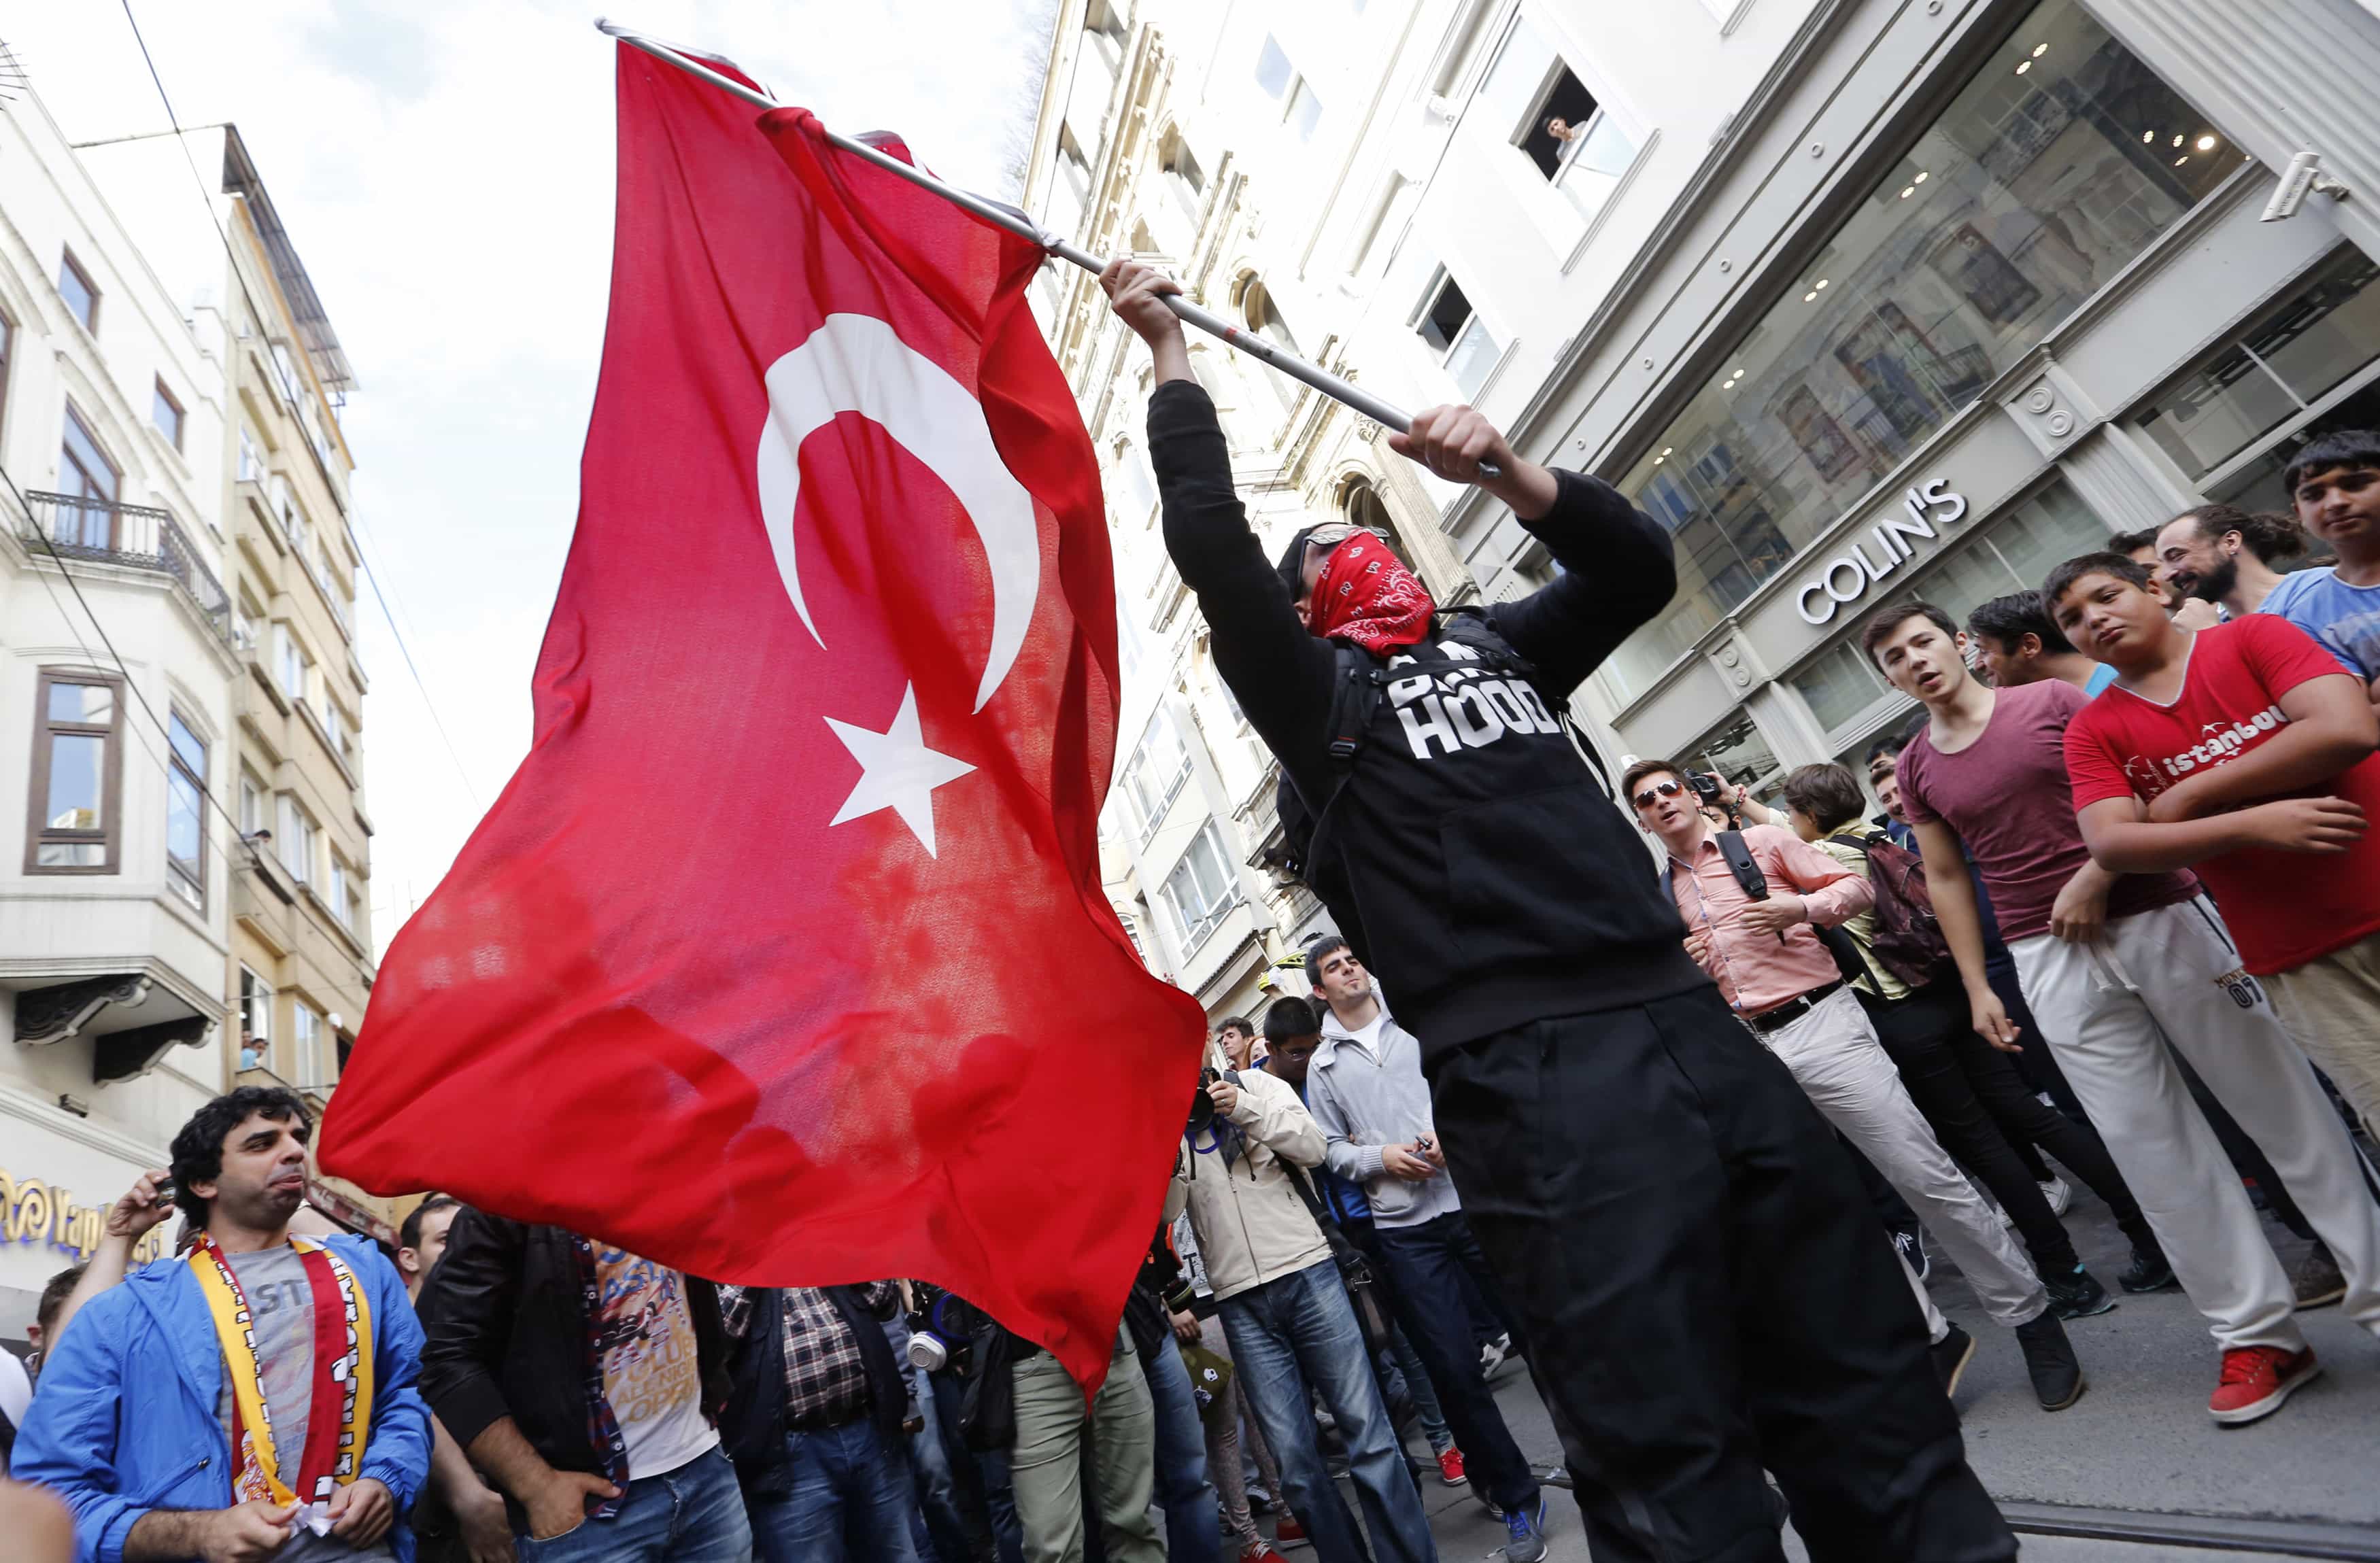 A masked demonstrator waves a Turkish flag during a protest in central Istanbul May 31, 2014 on the first anniversary of nationwide protests, REUTERS/Murad Sezer